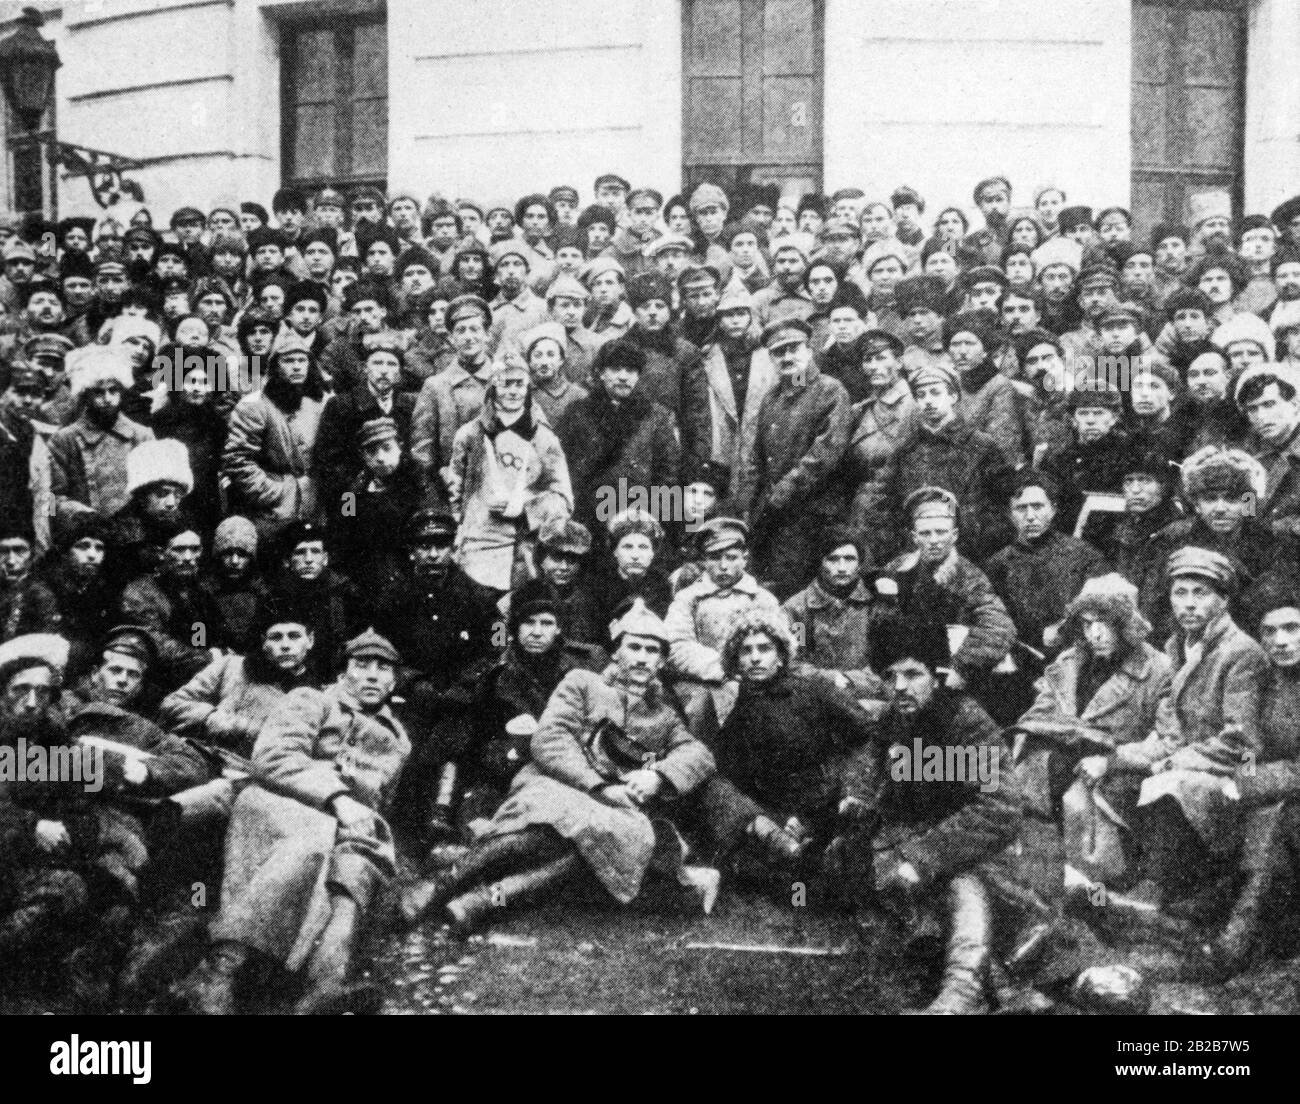 A picture of Lenin, Trotsky and a group of Red Army soldiers after the suppression of the Kronstadt rebellion. Stock Photo